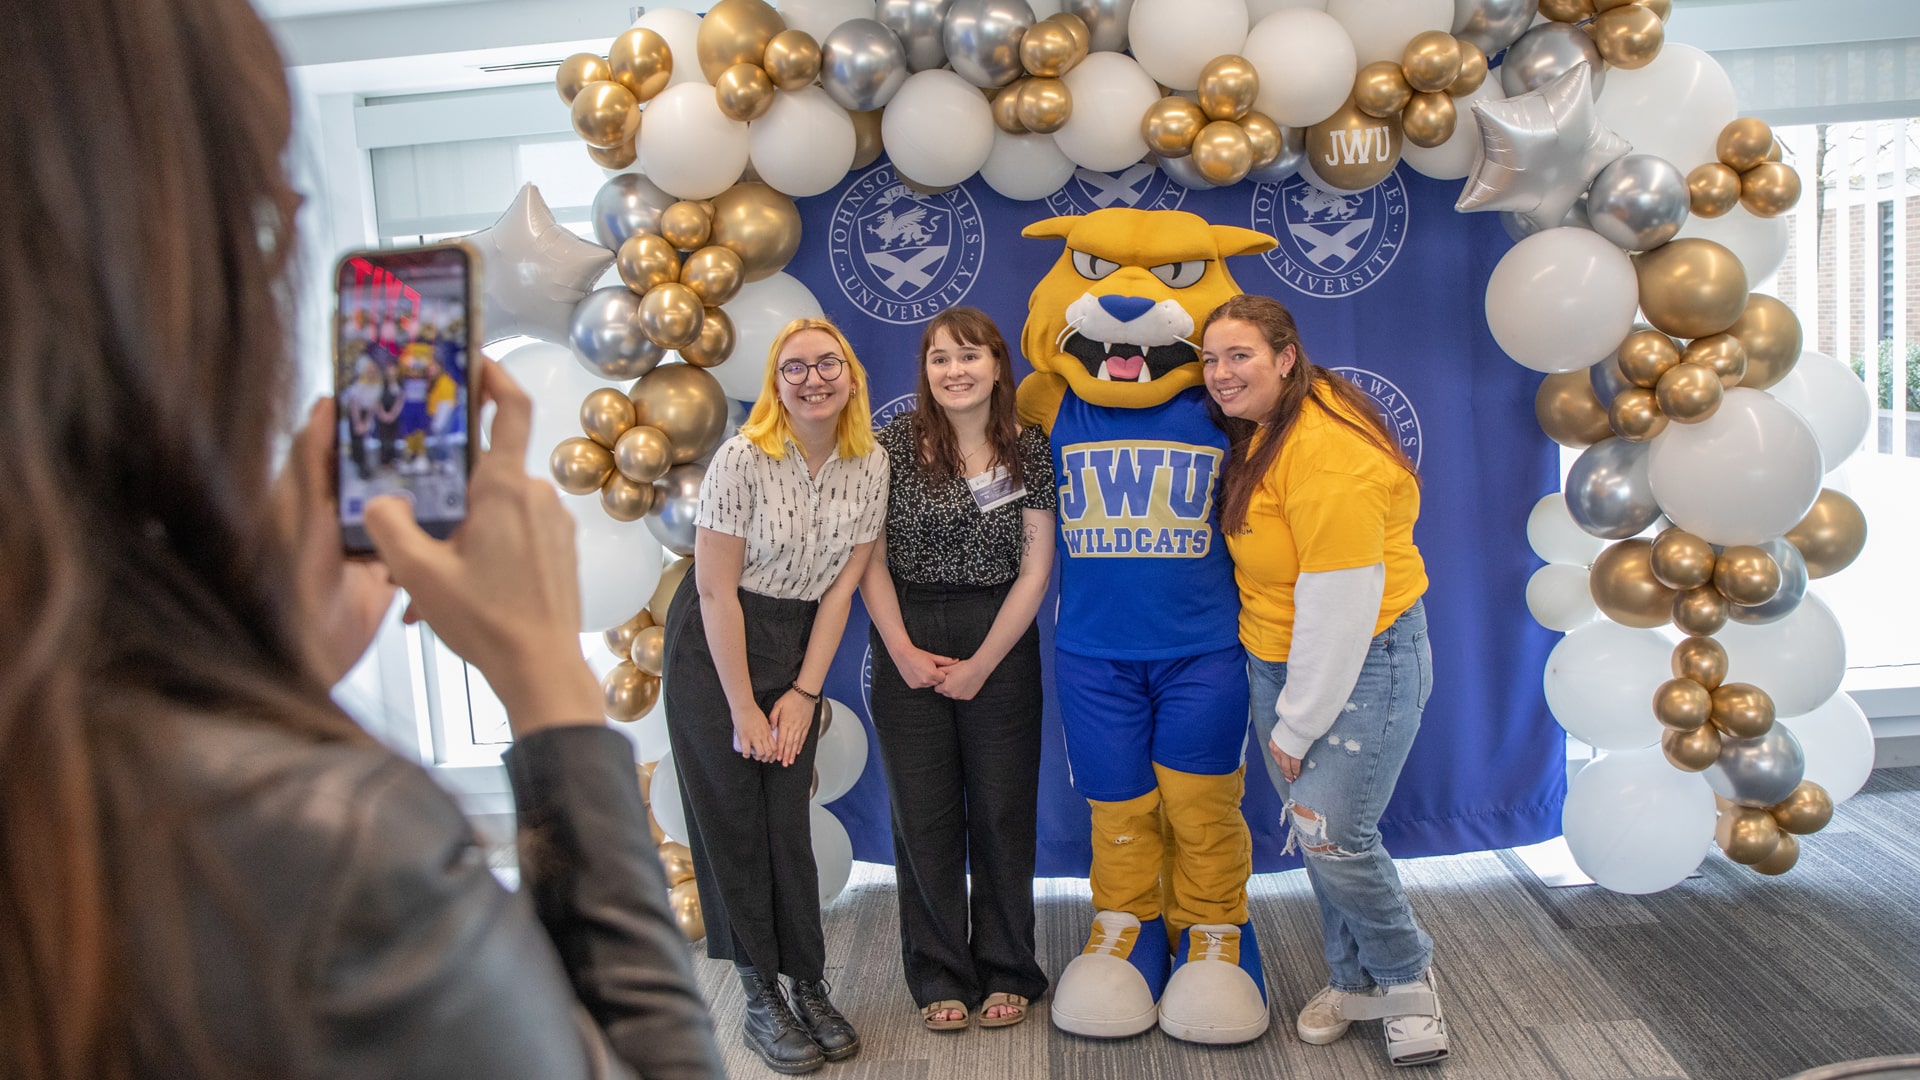 Students pose at the Symposium with Wildcat Willie.